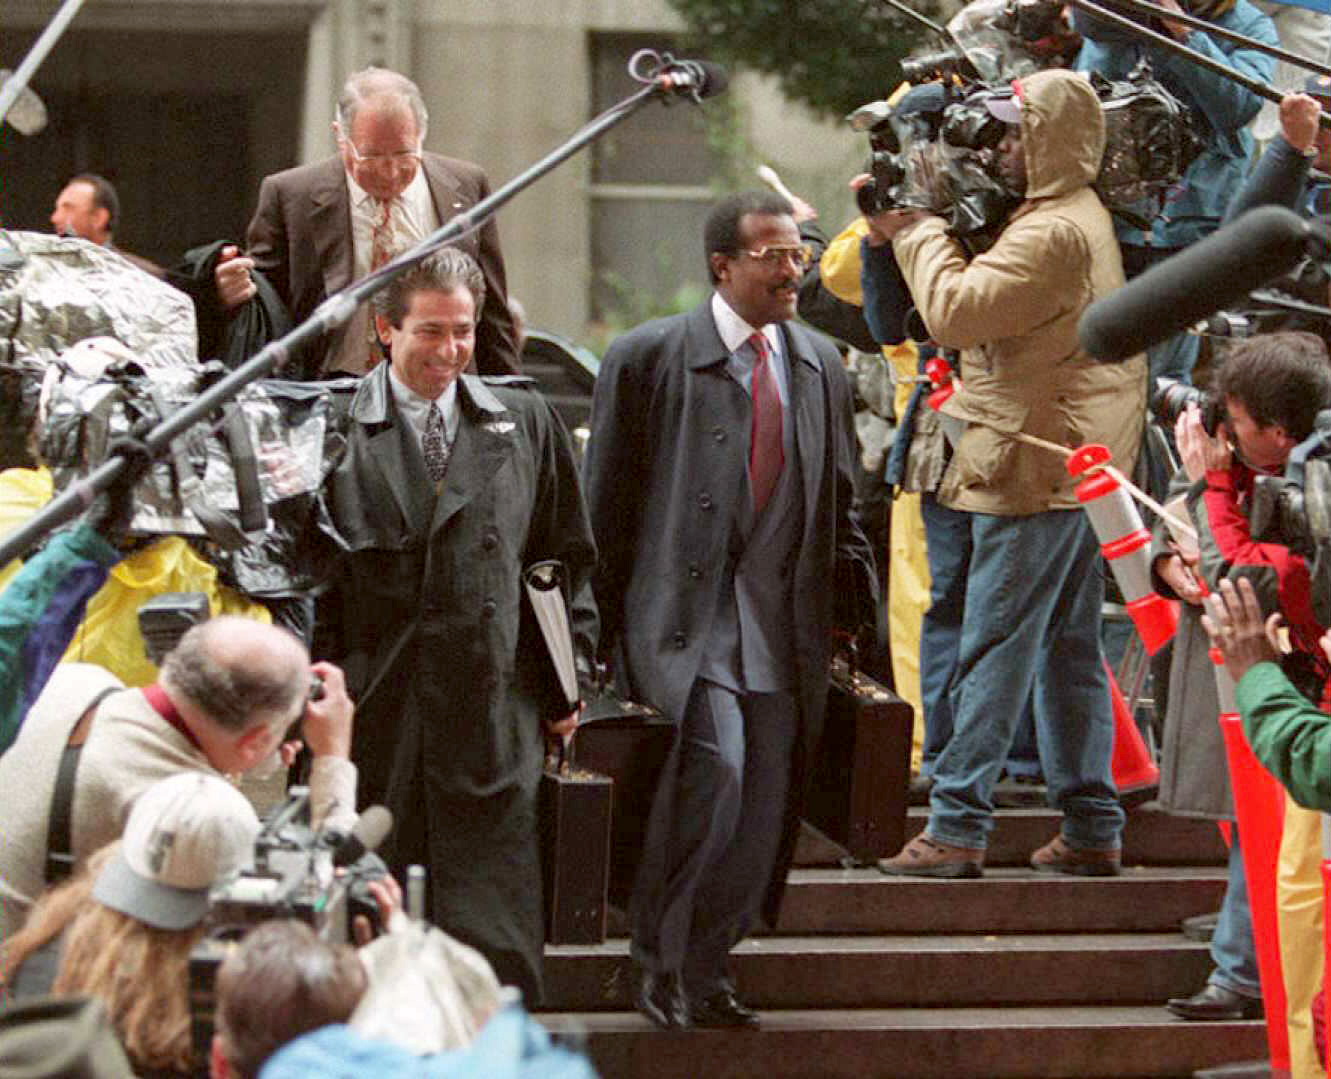 PHOTO: Defense attorneys Johnnie Cochran and Robert Kardashian arrive for the opening statements in the O.J. Simpson double murder trial in Los Angeles, Jan. 24, 1995.